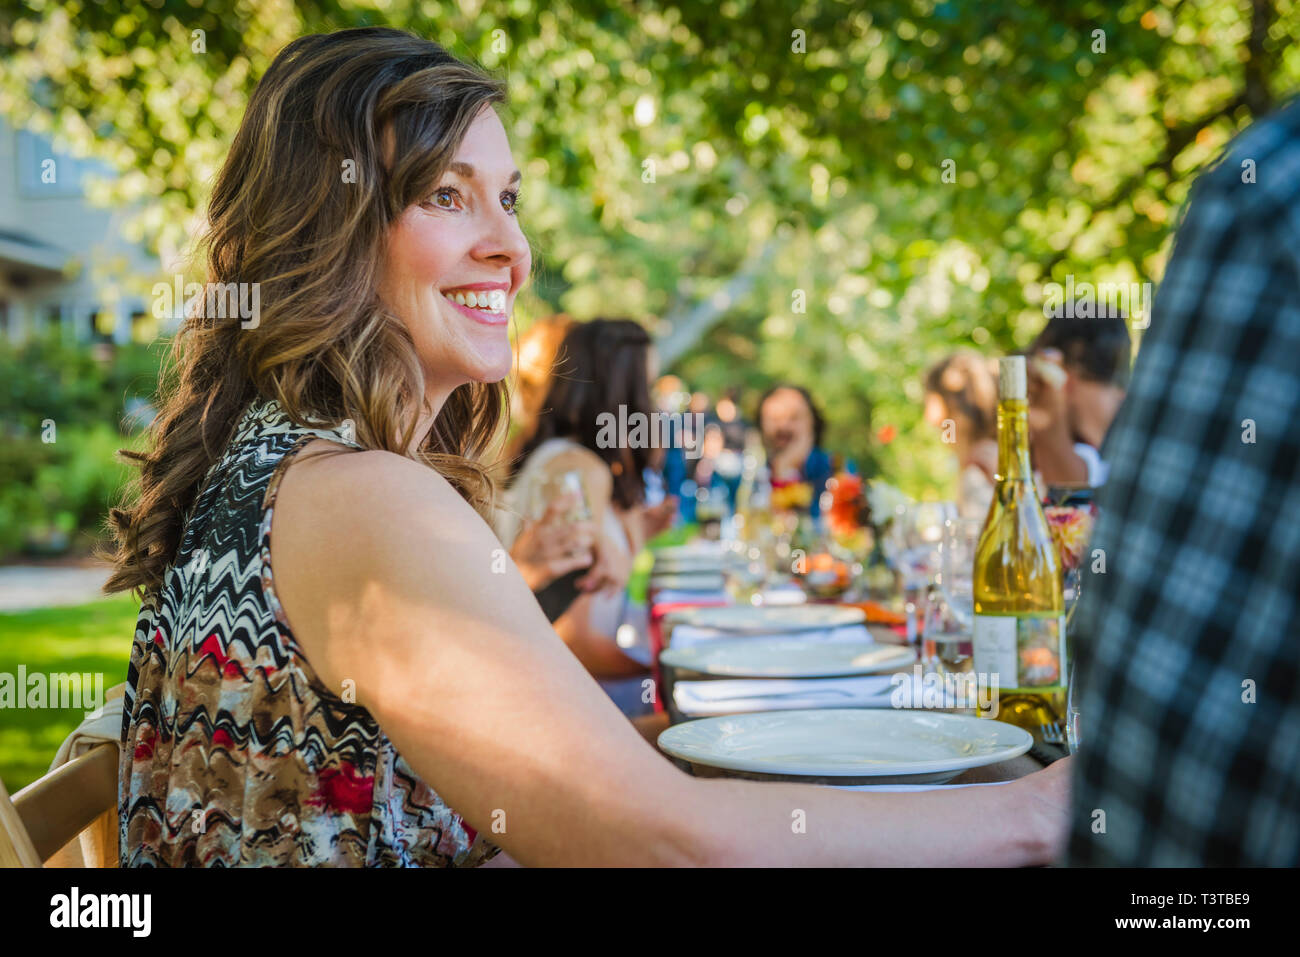 Portrait of smiling Caucasian woman sitting at table at party outdoors Stock Photo